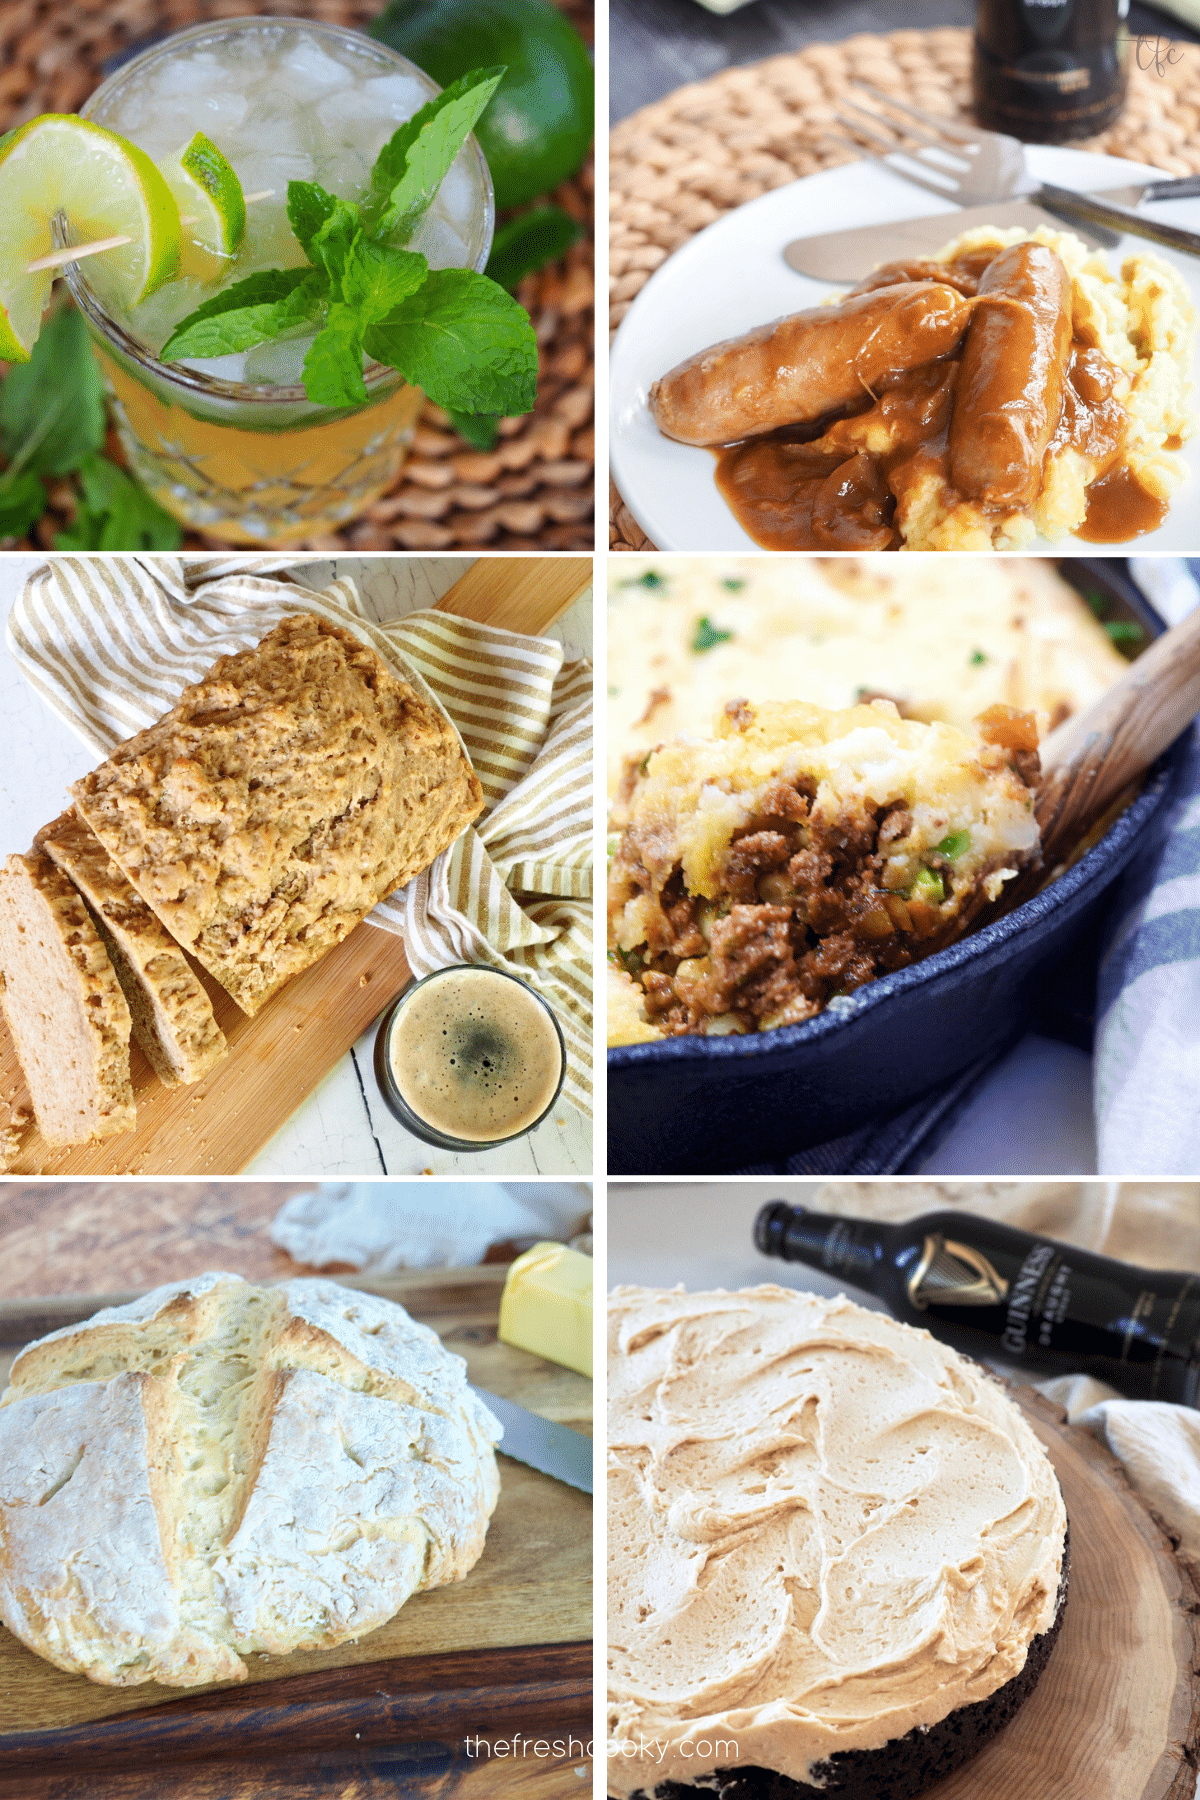 6 grid image of Irish St. Patrick's Day Recipes, from Irish Whisky to Bangers and Mash, Beer bread, Shepherd's Pie, Soda bread and Guinness Chocolate cake.